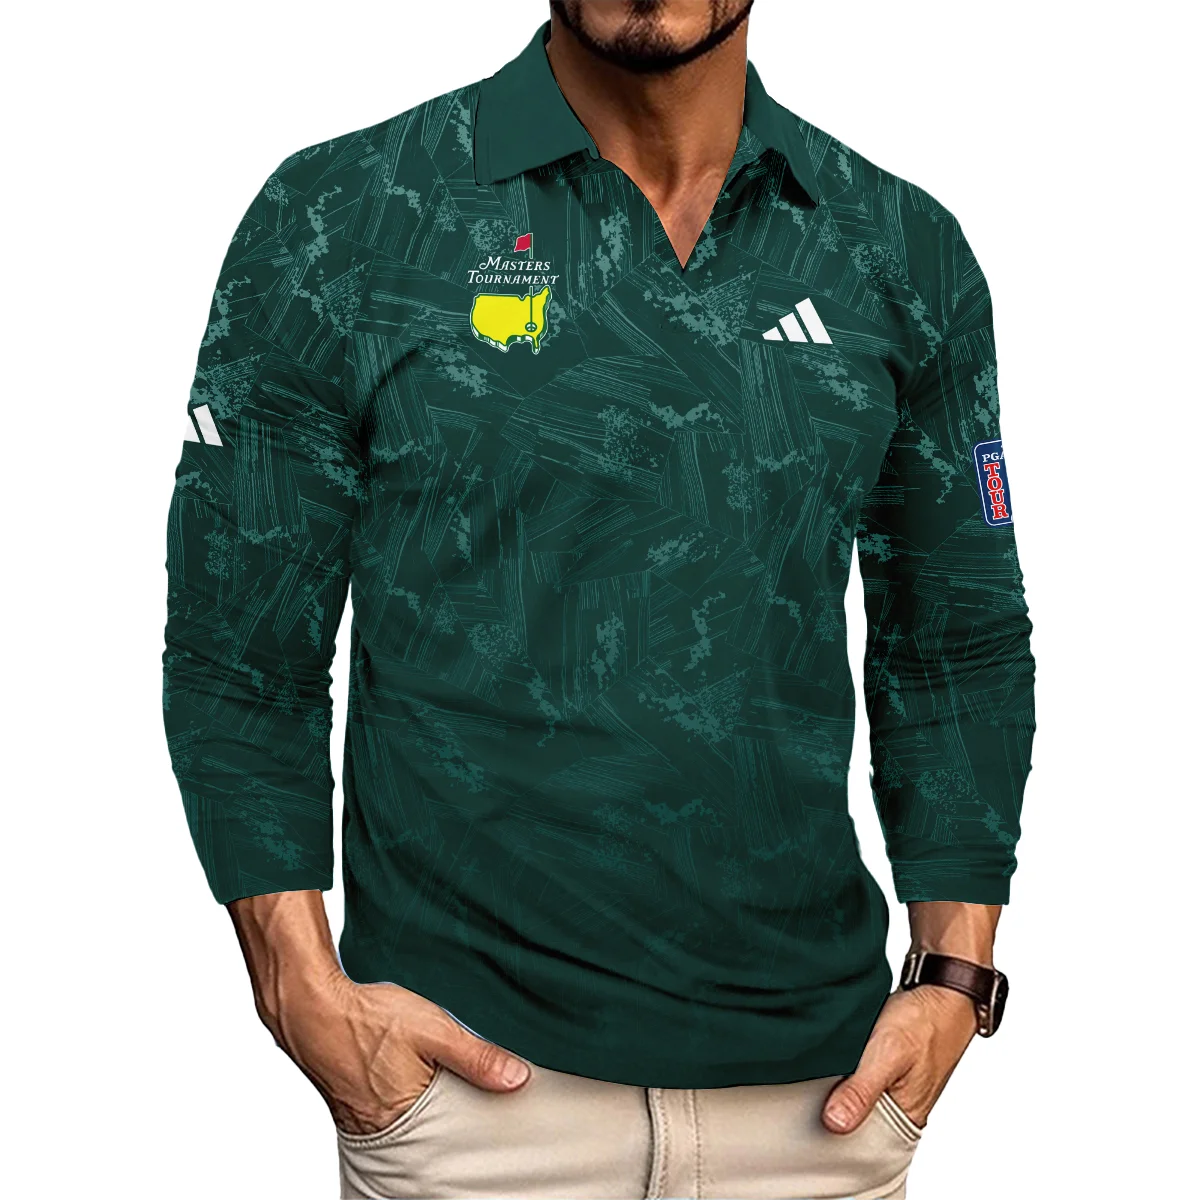 Dark Green Background Masters Tournament Adidas Vneck Polo Shirt Style Classic Polo Shirt For Men